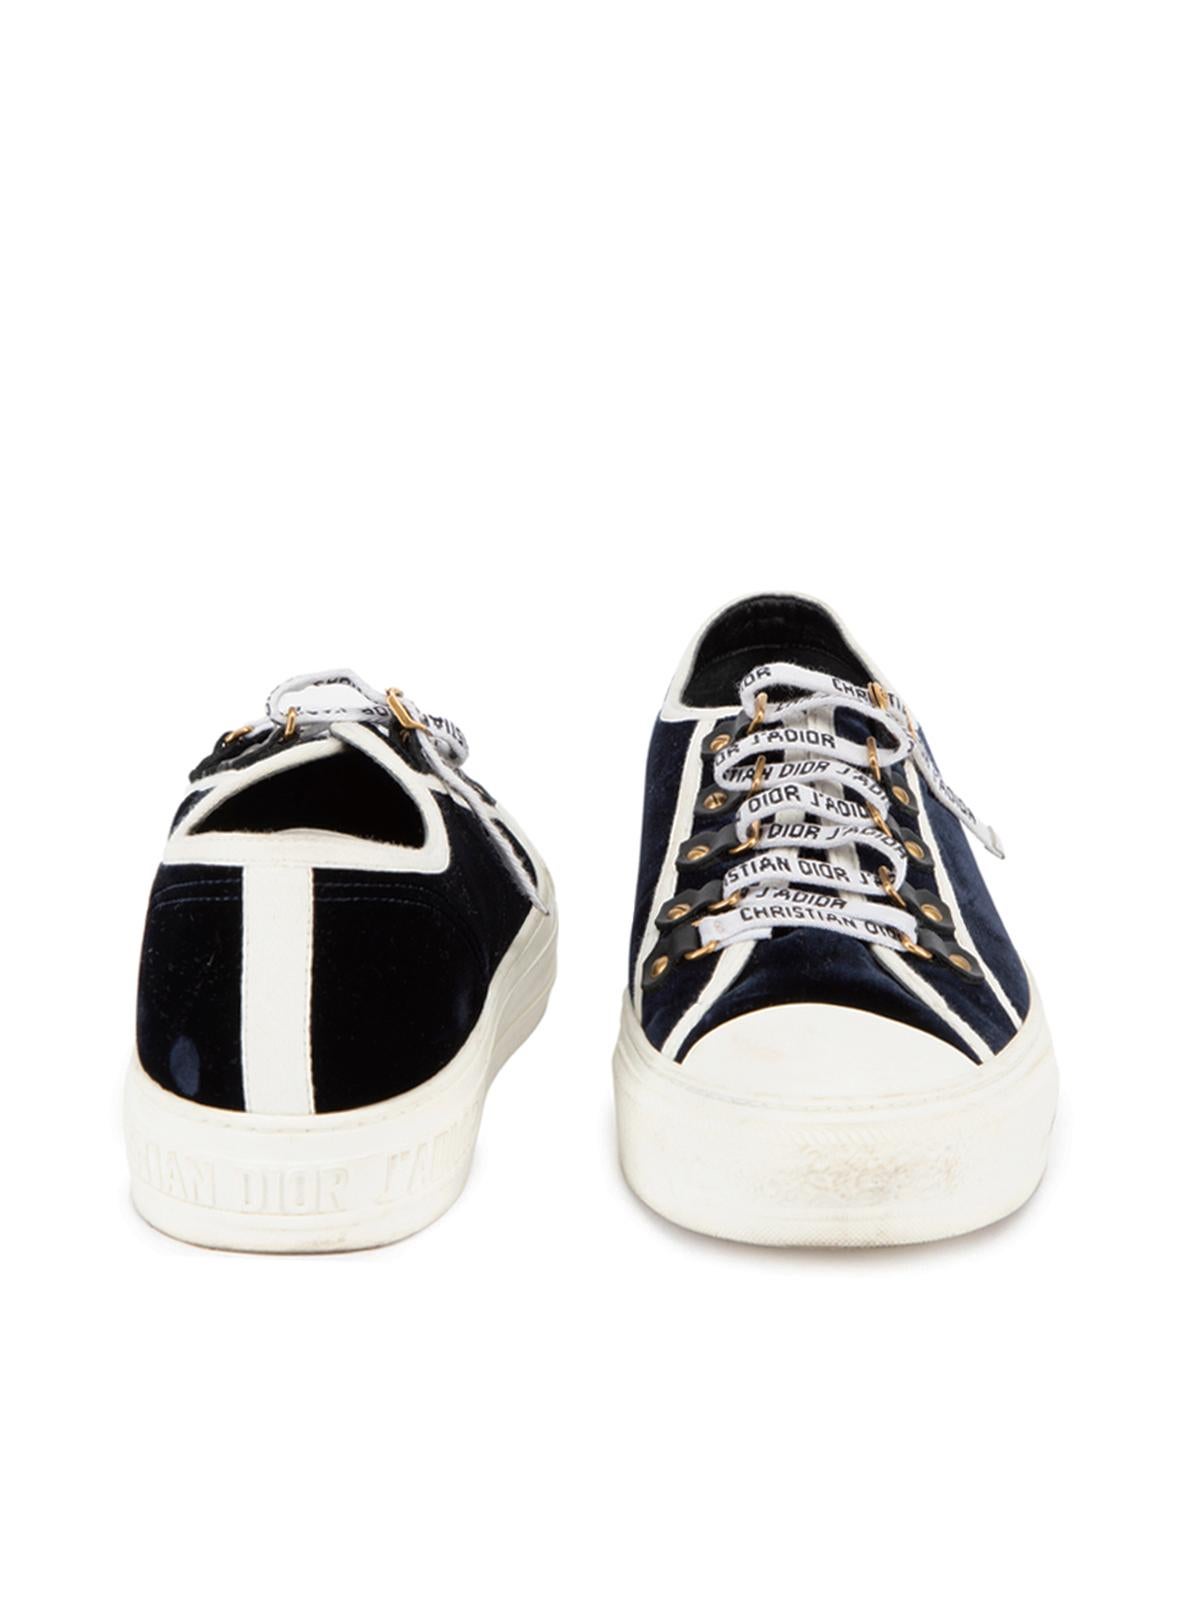 Pre-Loved Christian Dior Women's Black & White Low Top Trainers In Excellent Condition In London, GB